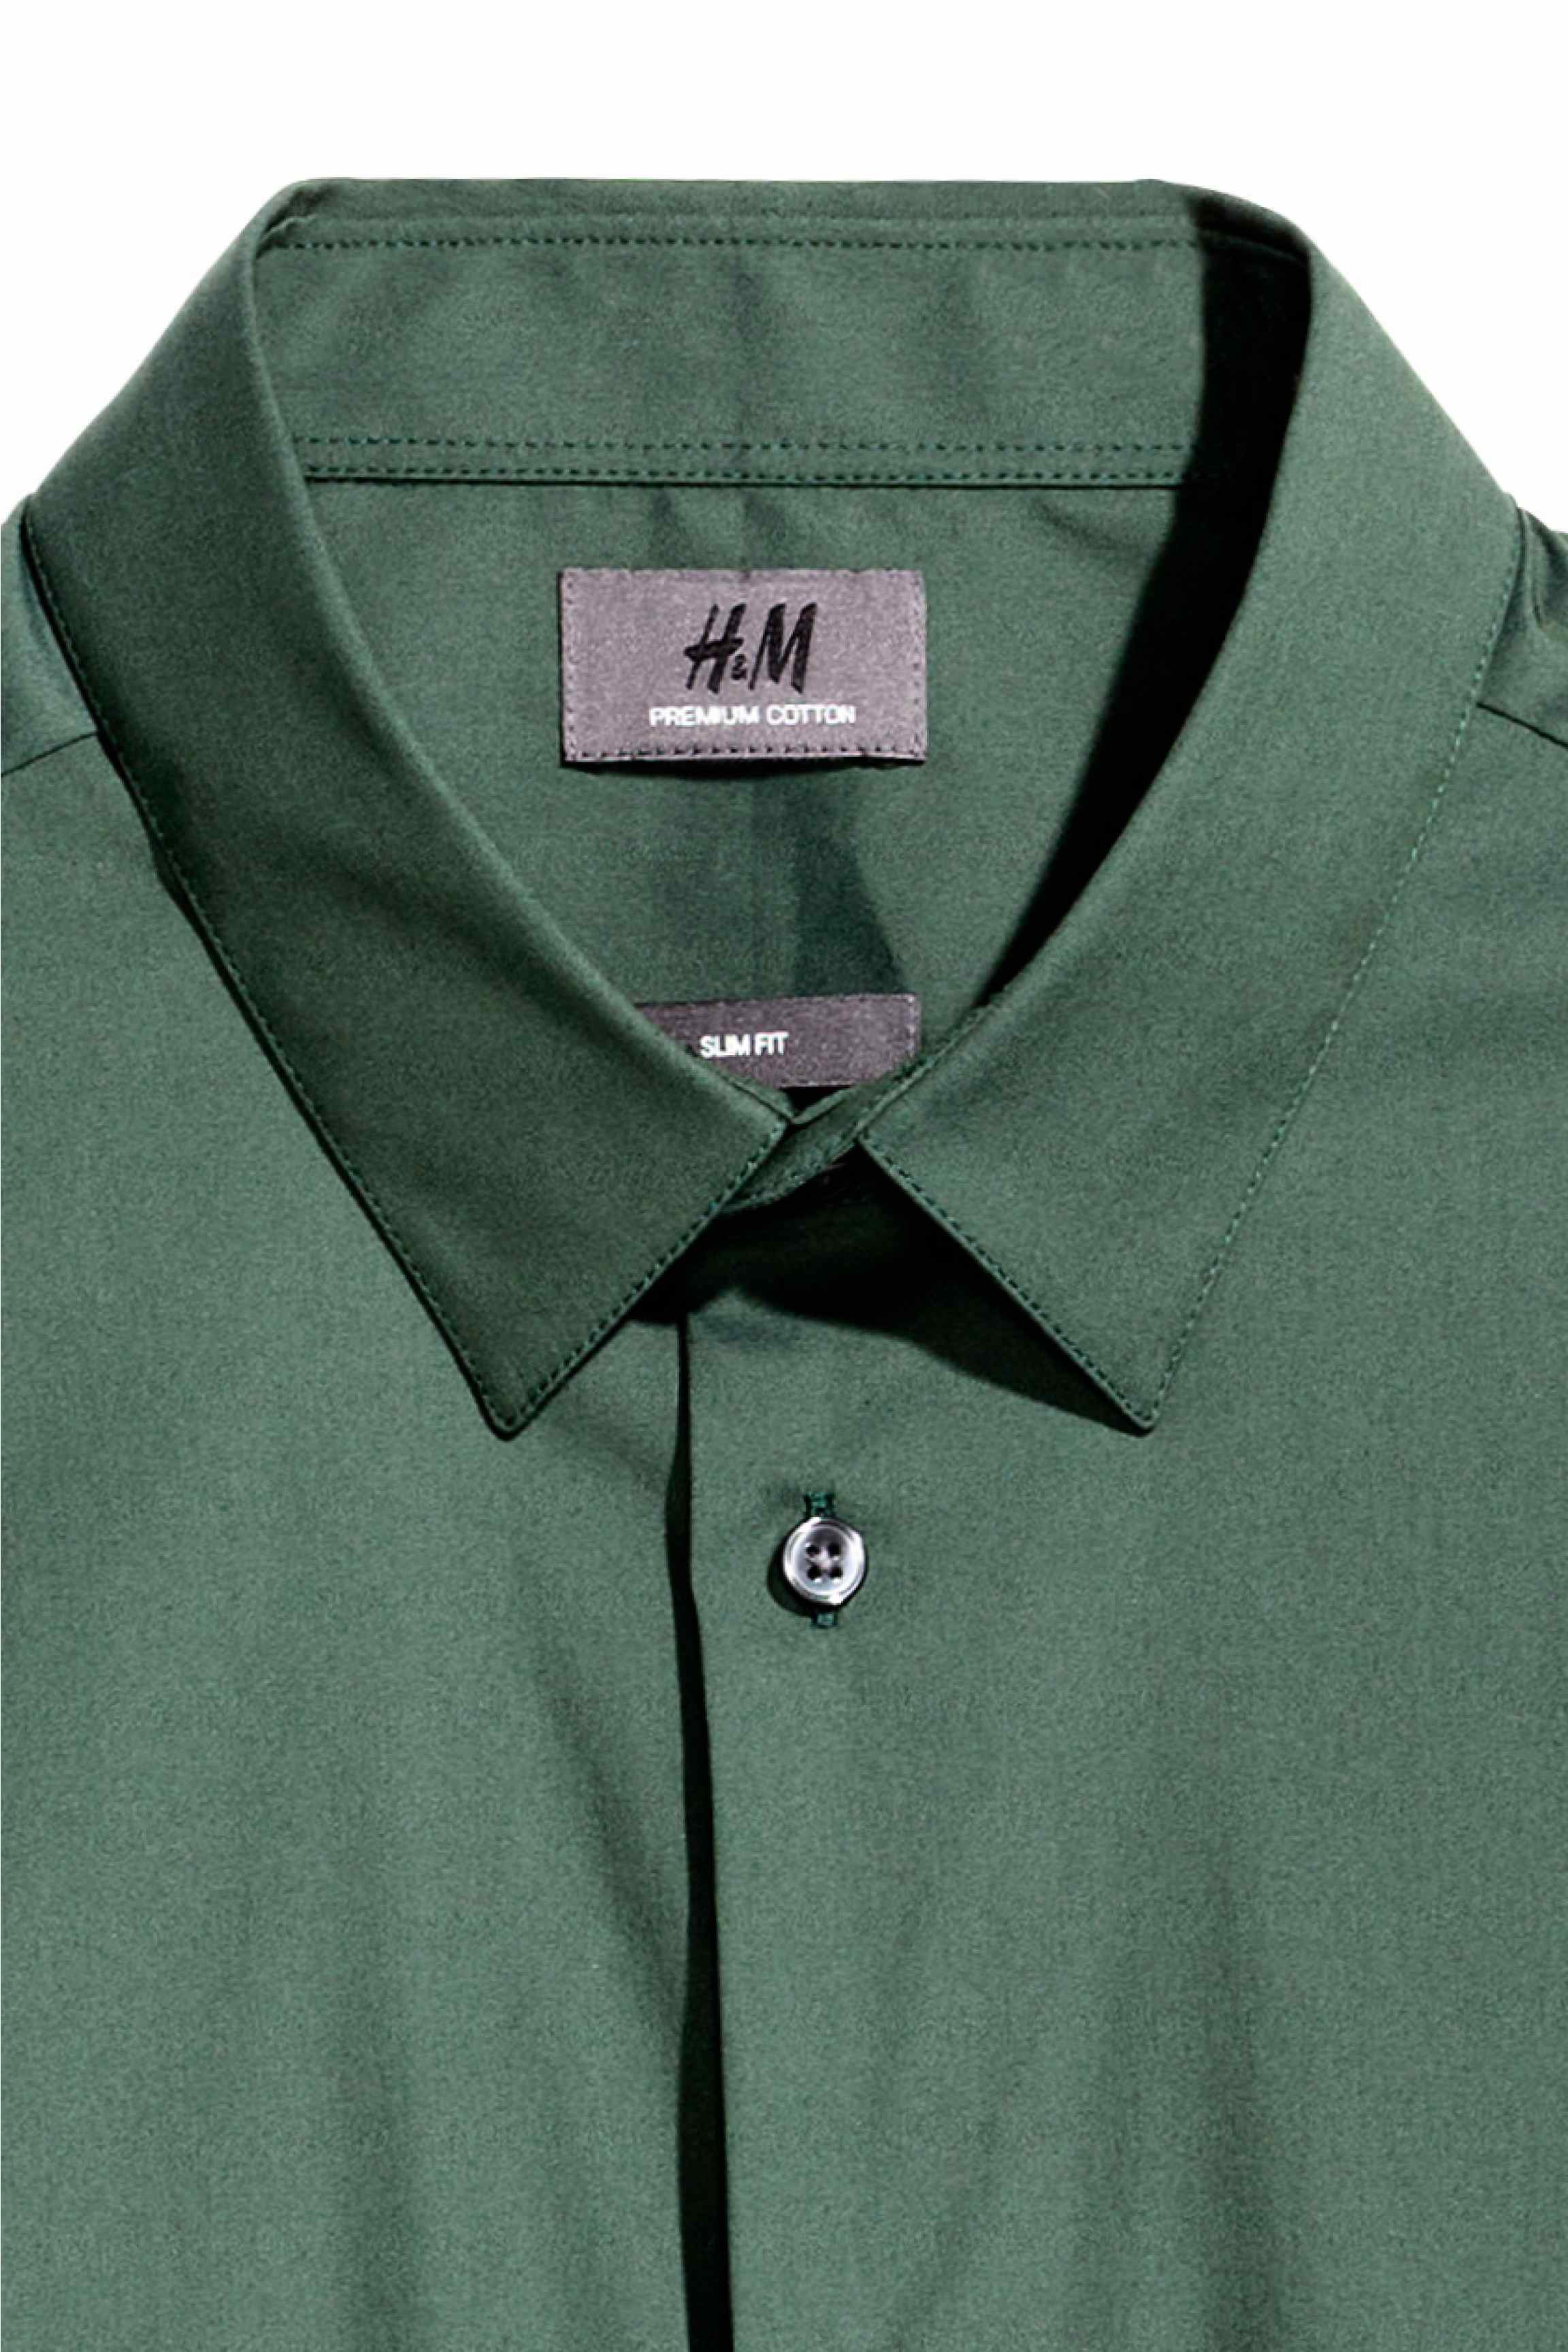 Lyst - H&M Stretch Shirt Slim Fit in Green for Men